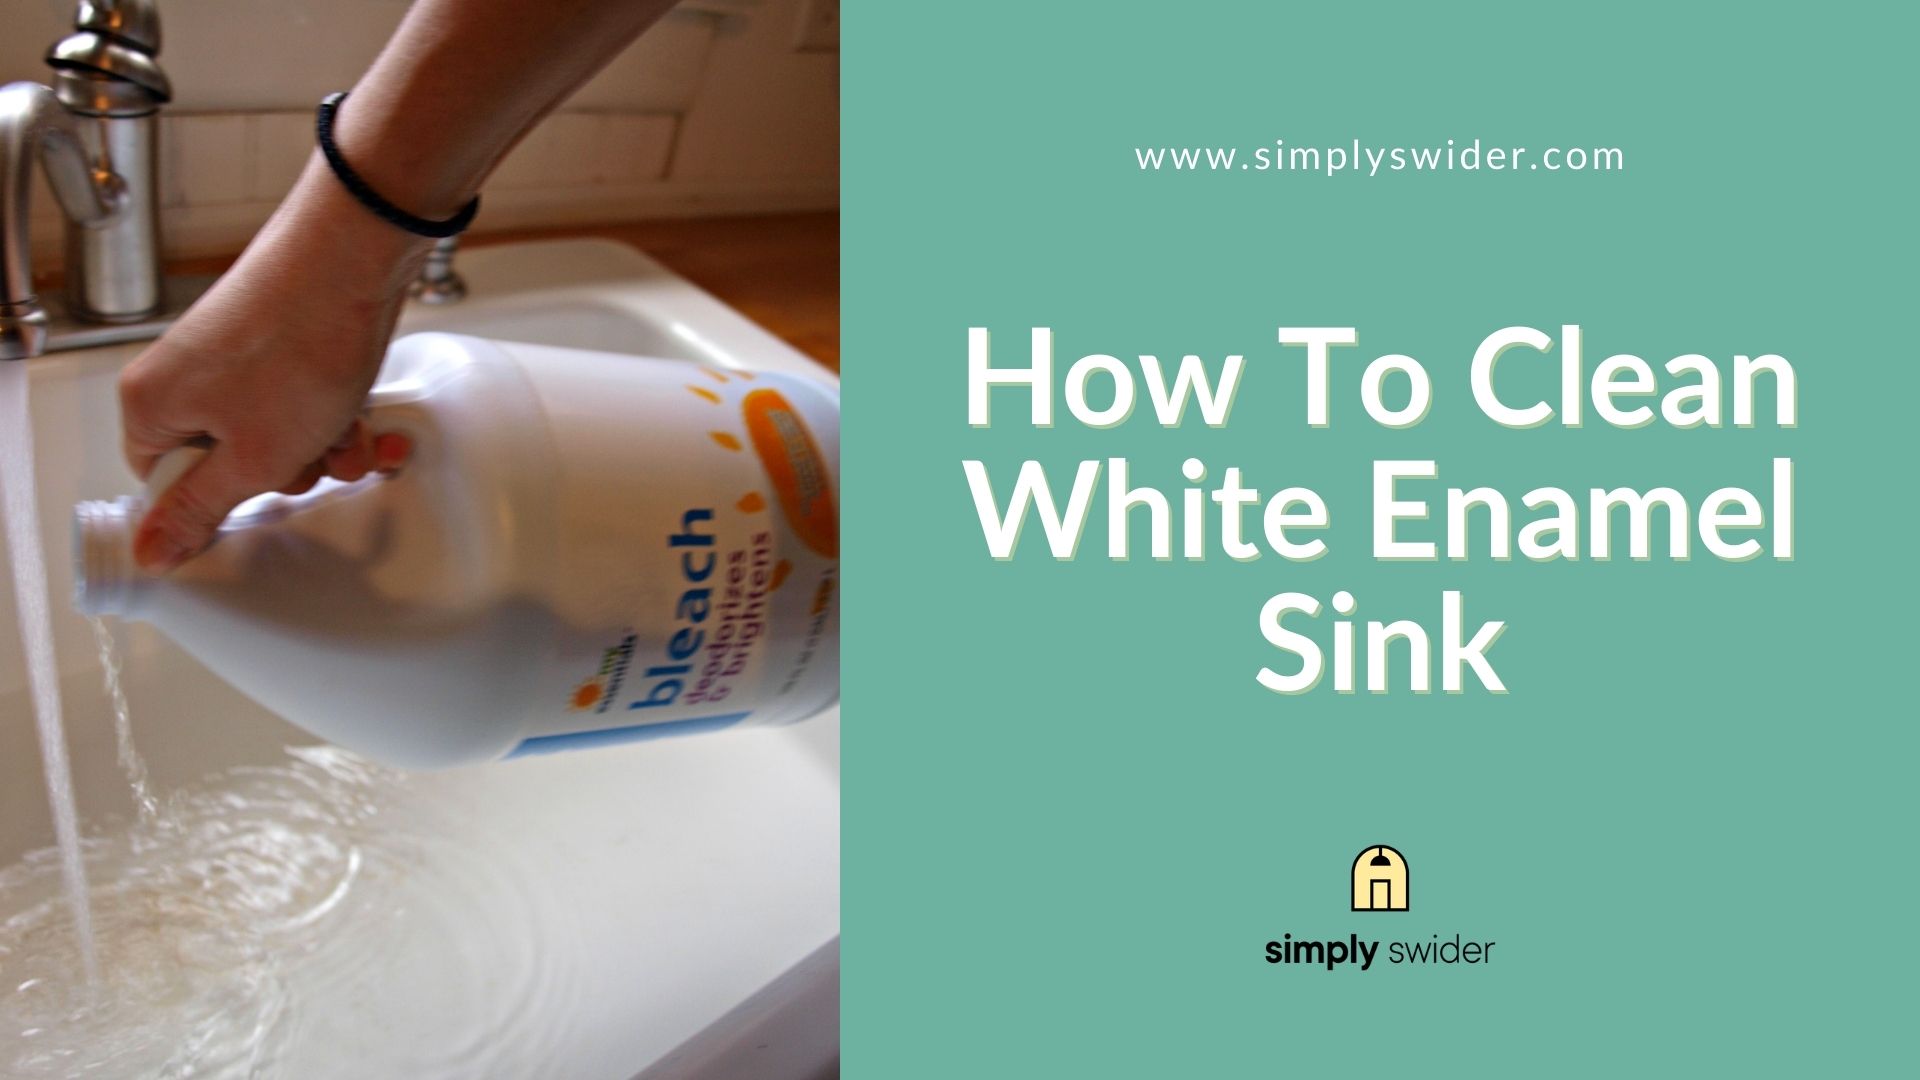 How To Clean White Enamel Sink